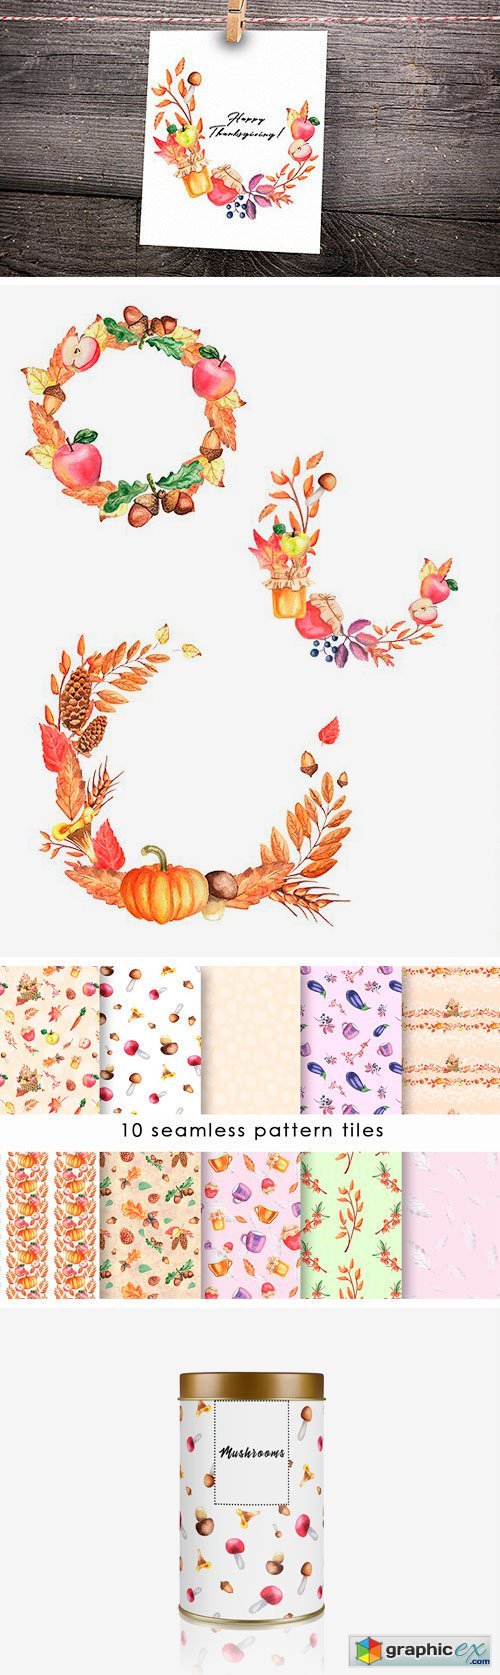 Autumn Collection Watercolor Clipart